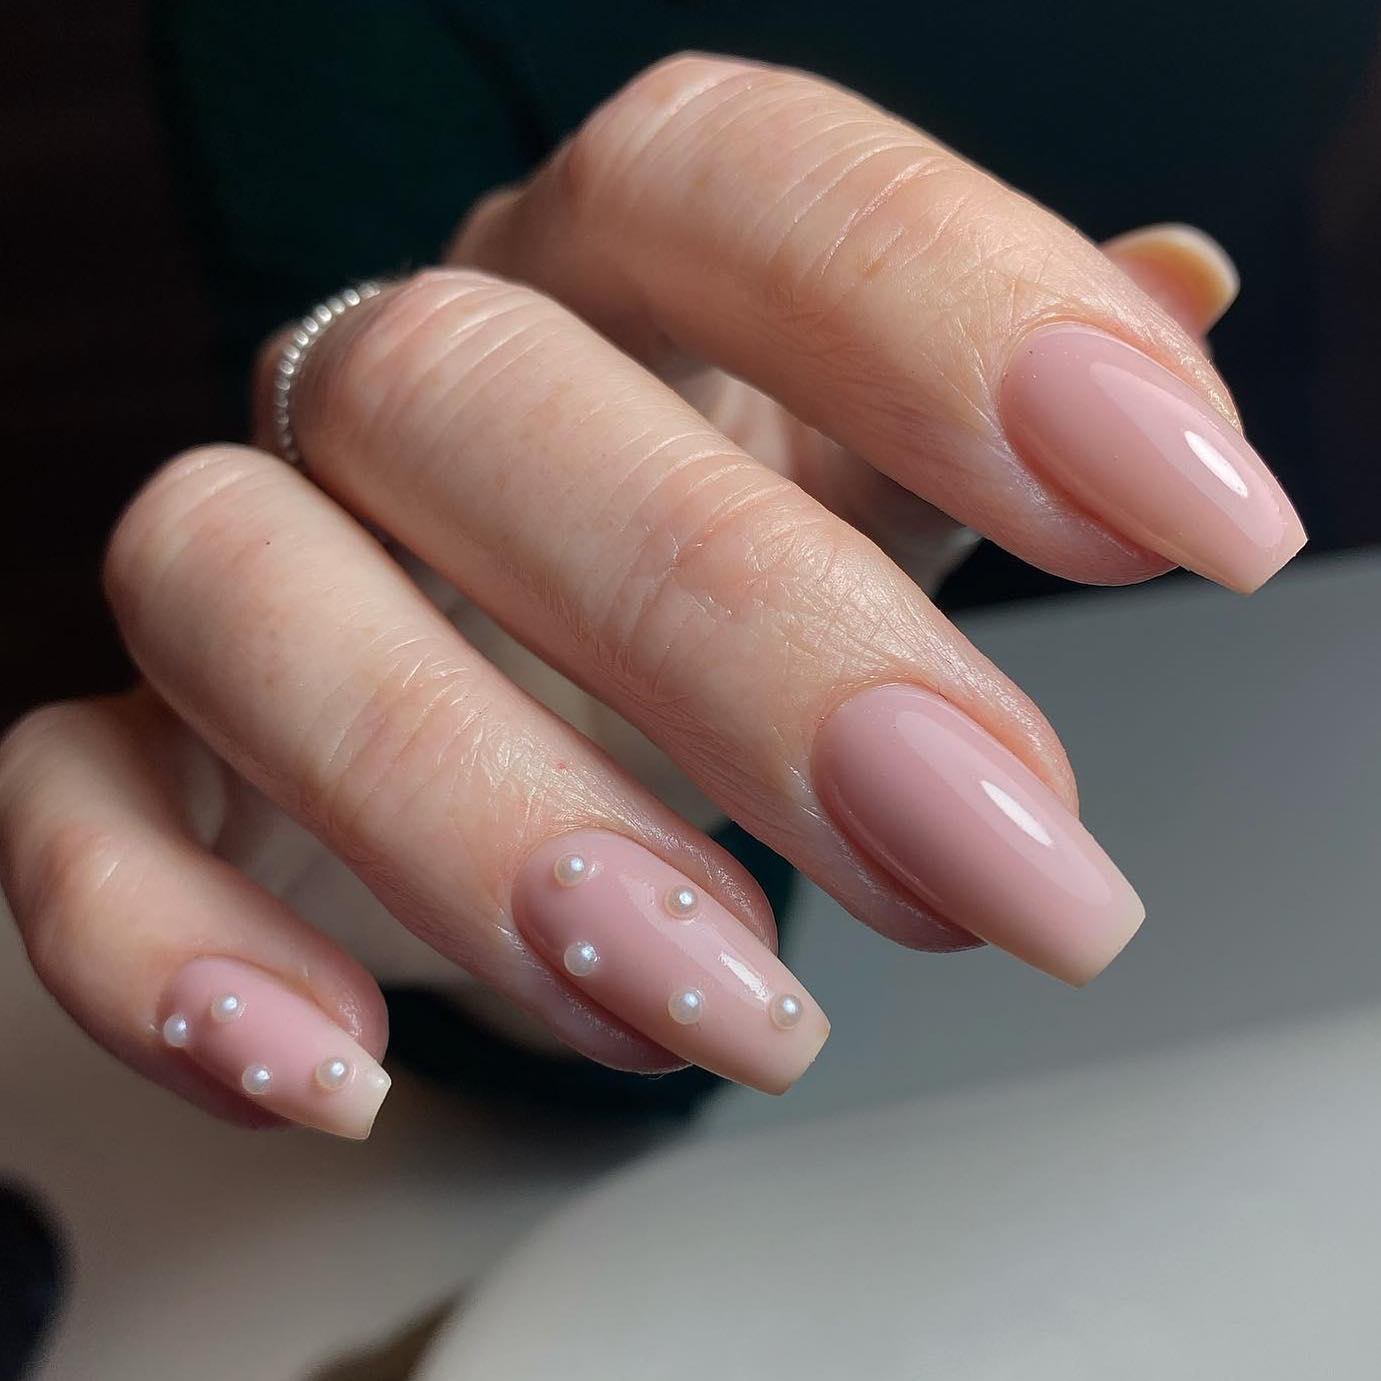 Manicure Monday: 7 Easy Pearl Nail Art Designs 